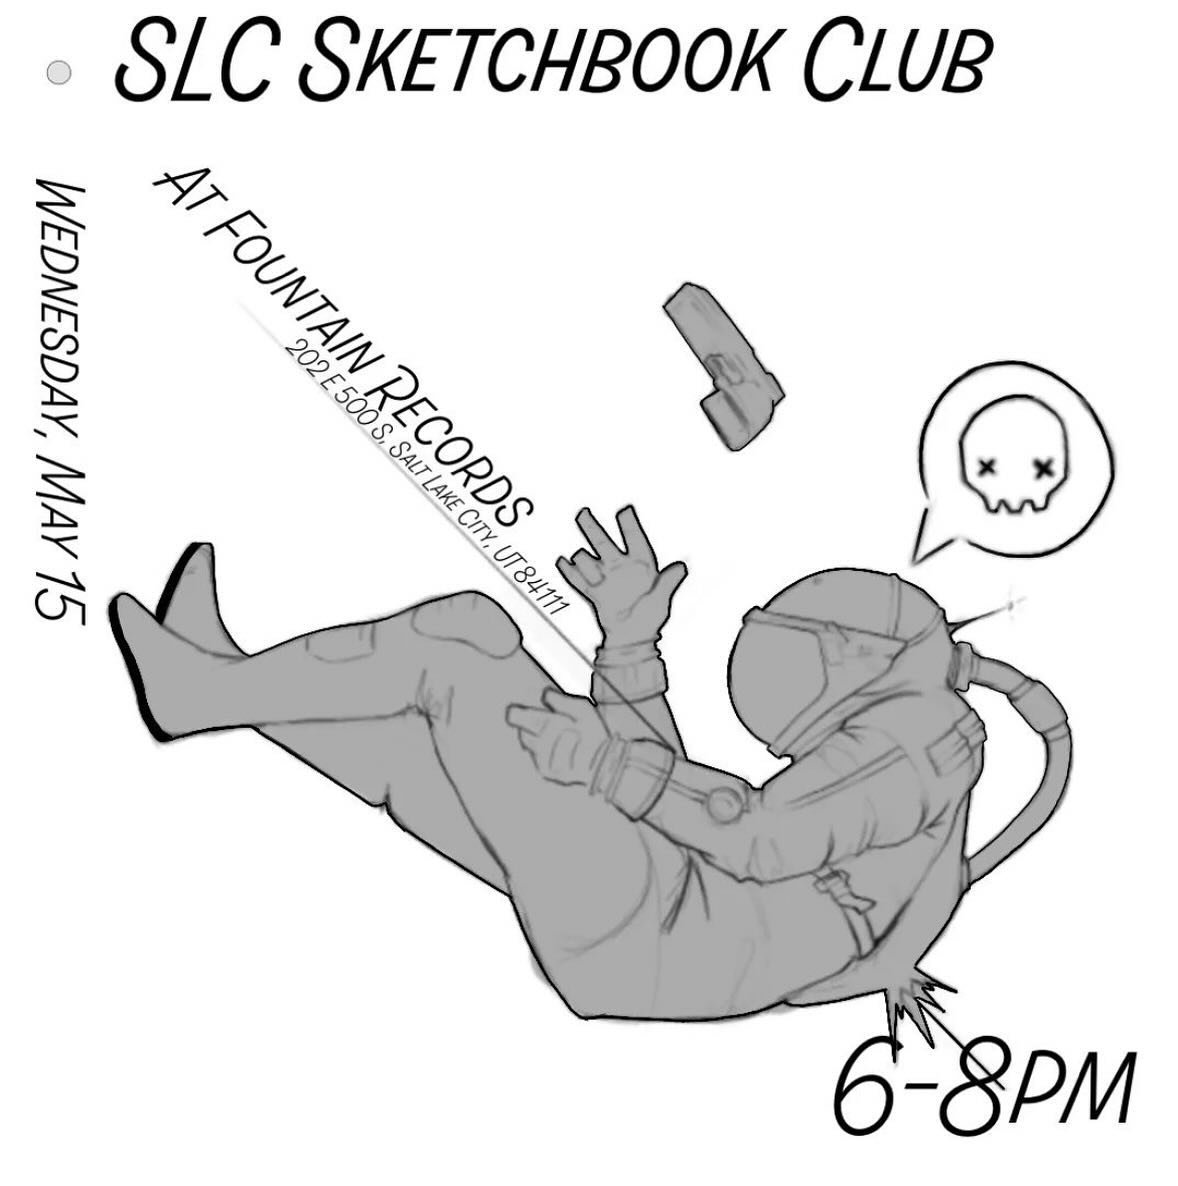 Join us Wednesday with @slcsketchbookclub 6-8pm for some music and sketching!